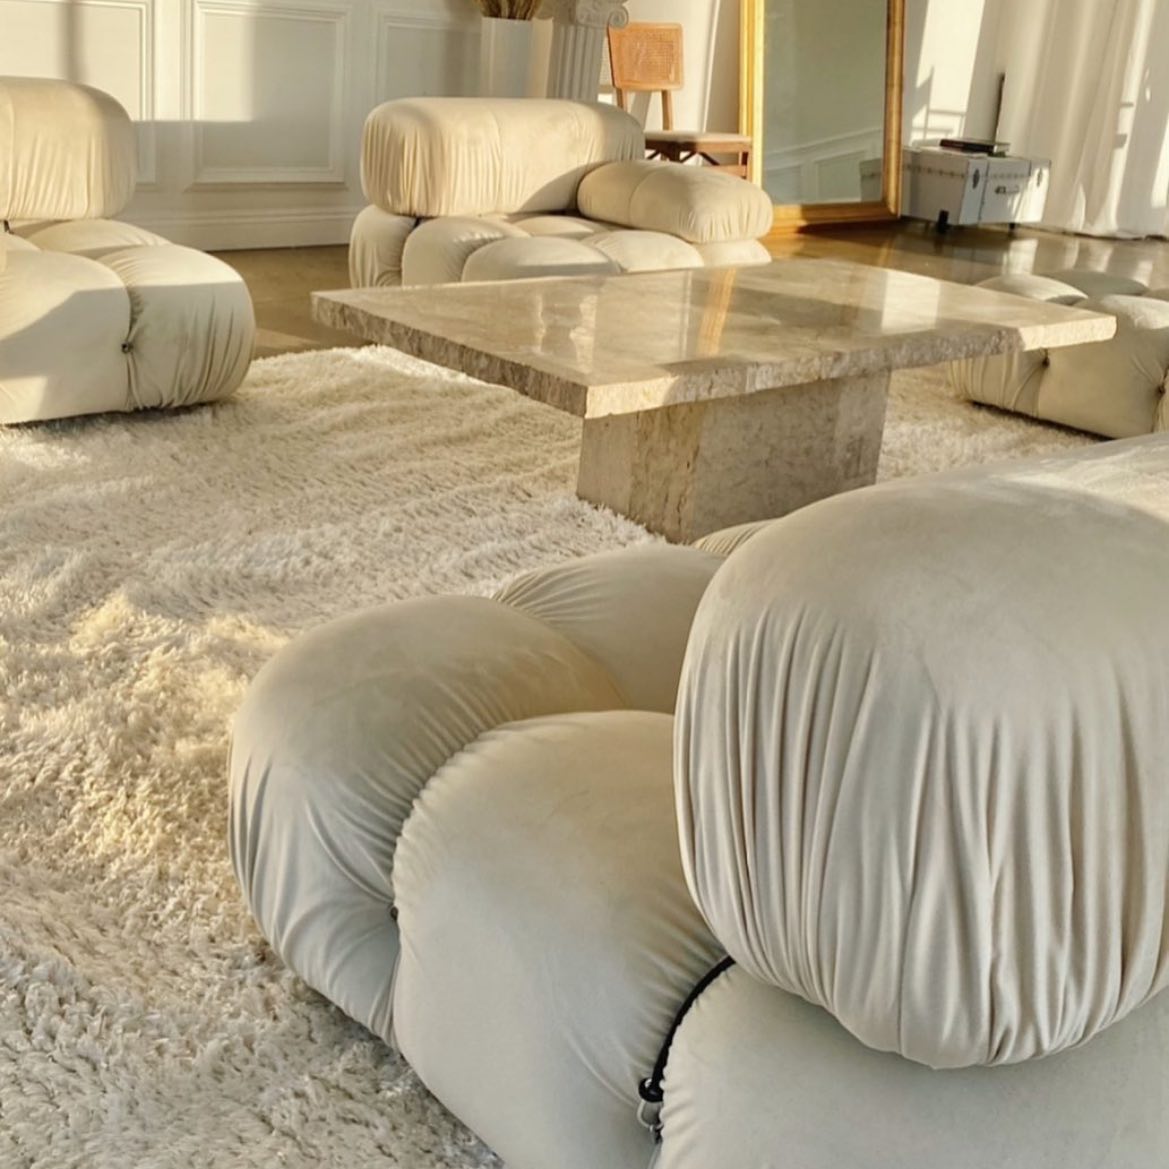 Three white sofas with a white glass table in the middle